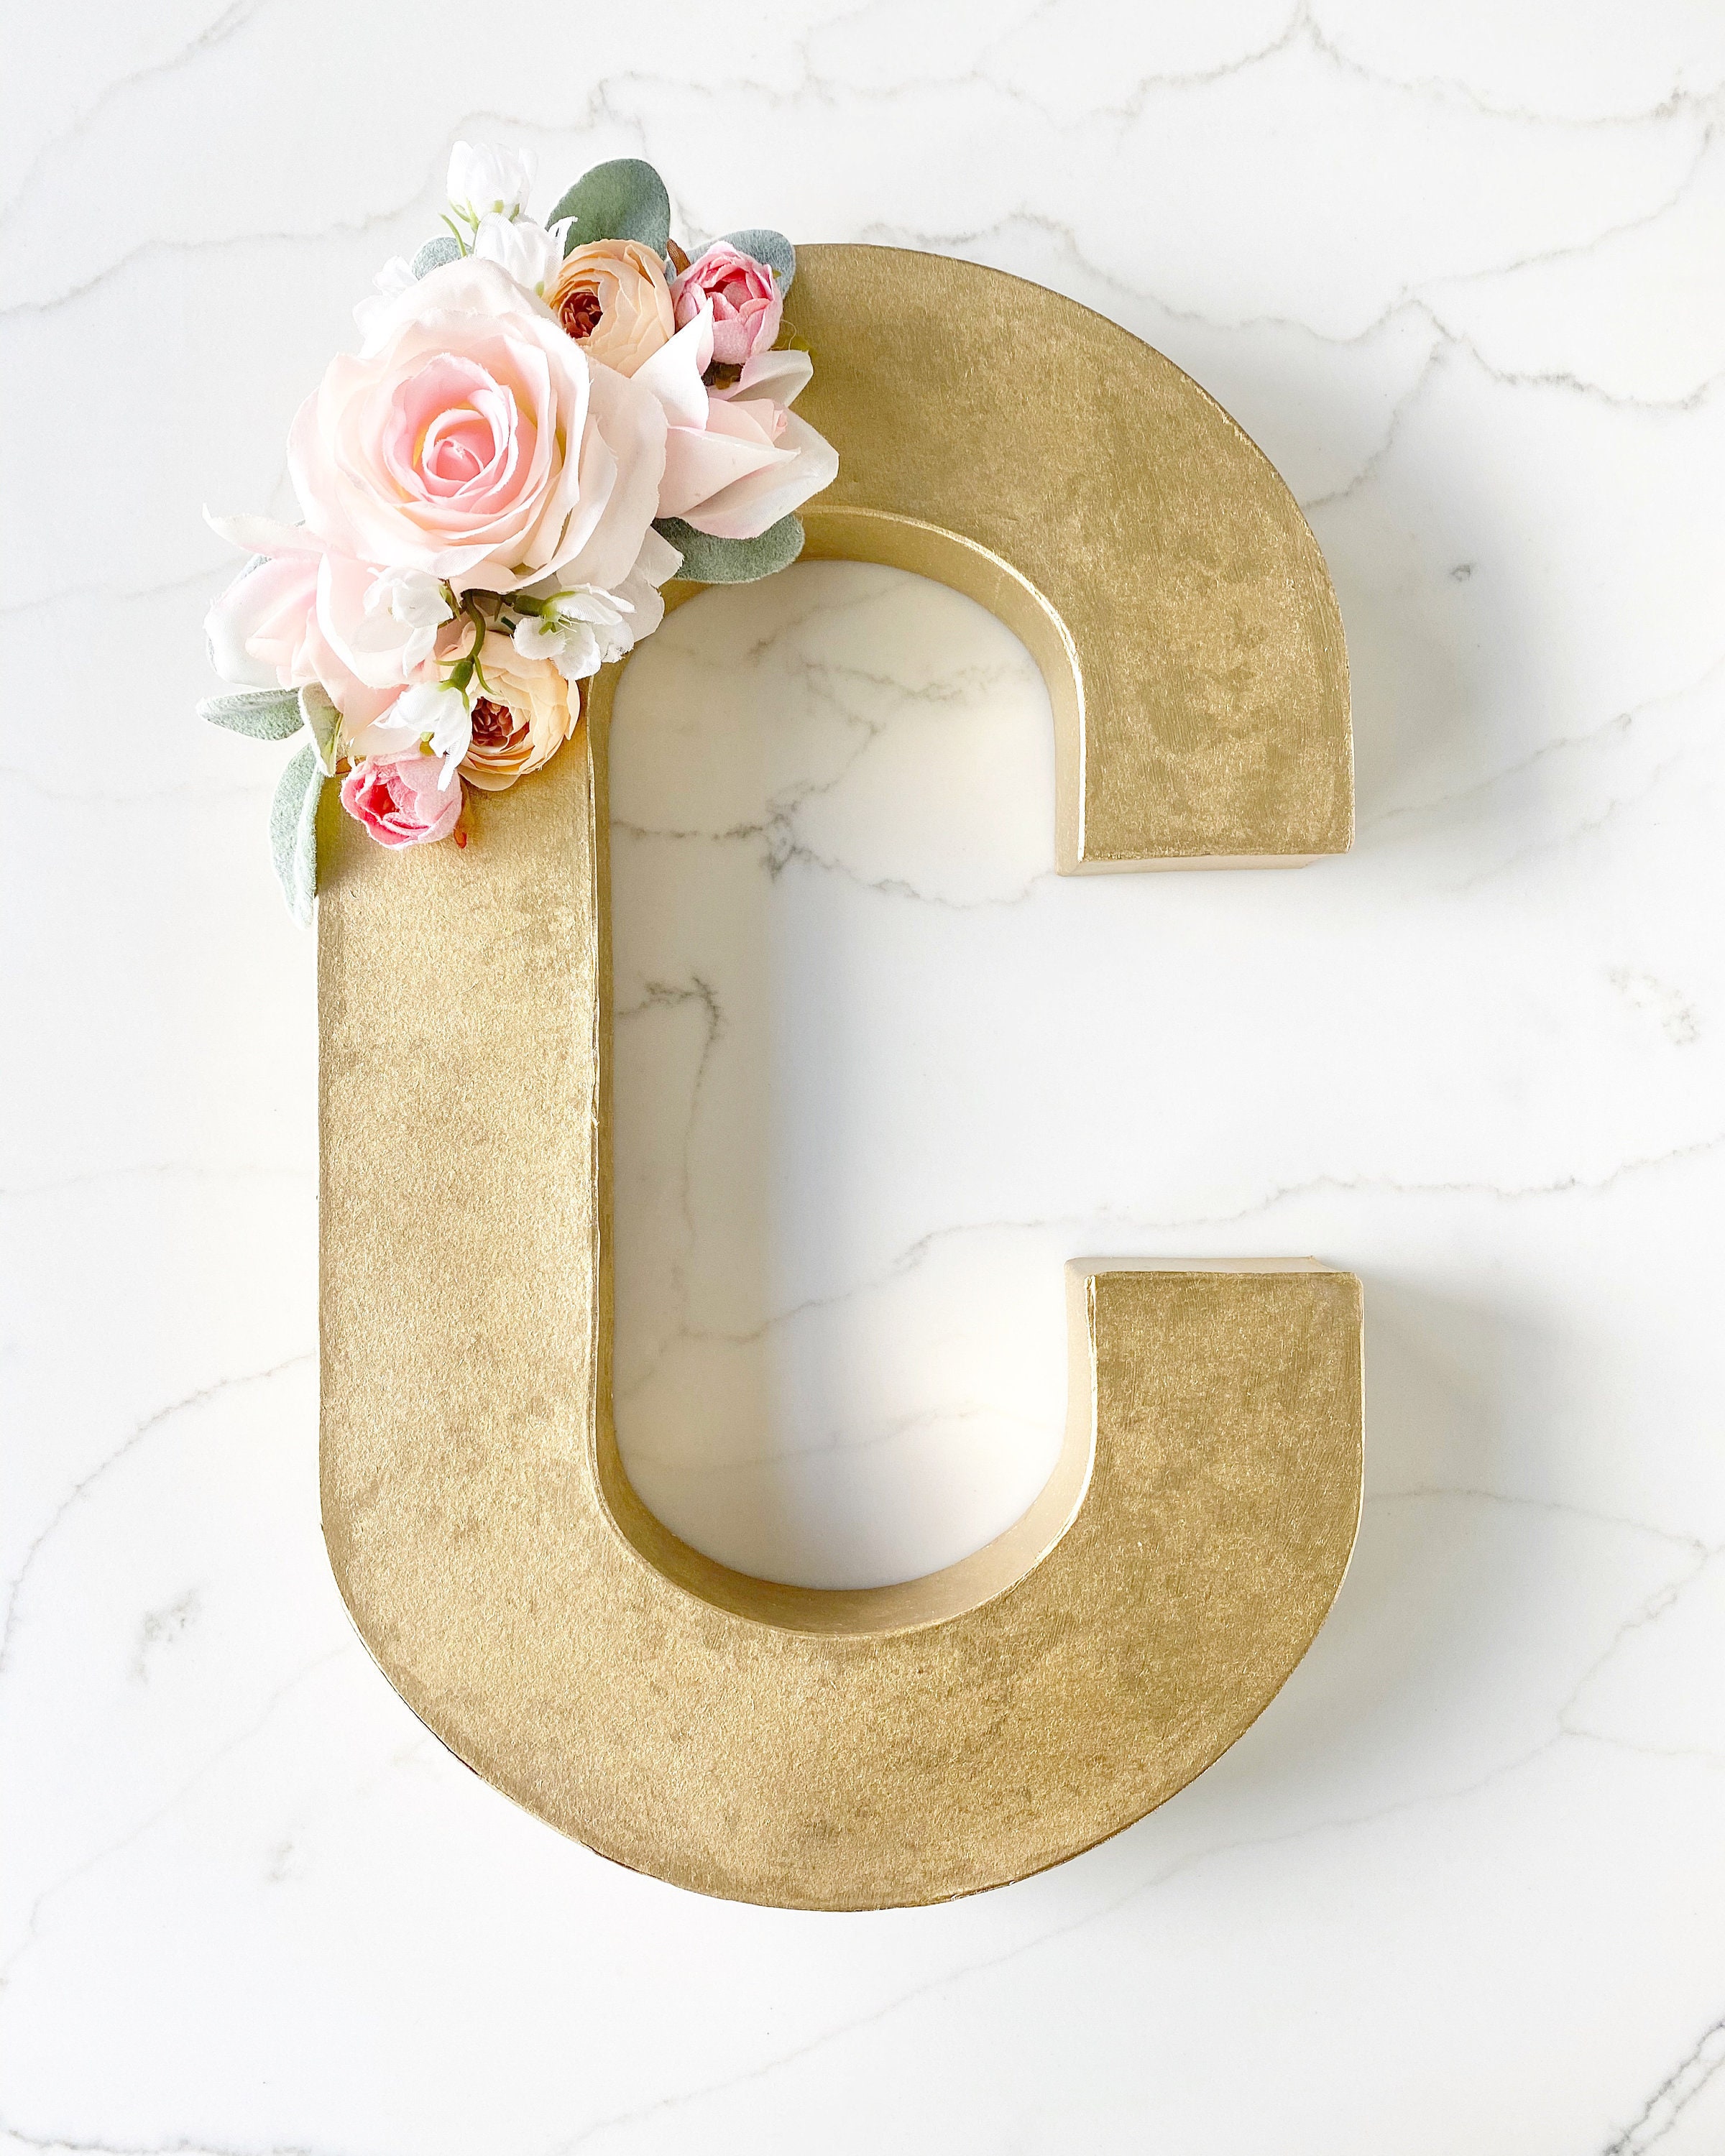 One Sign,one Letters, Free Standing Letters, Paper Mache Letters,birthday  Decor, Party Decor, Photo Shoot Prop,floral Letters. -  Denmark